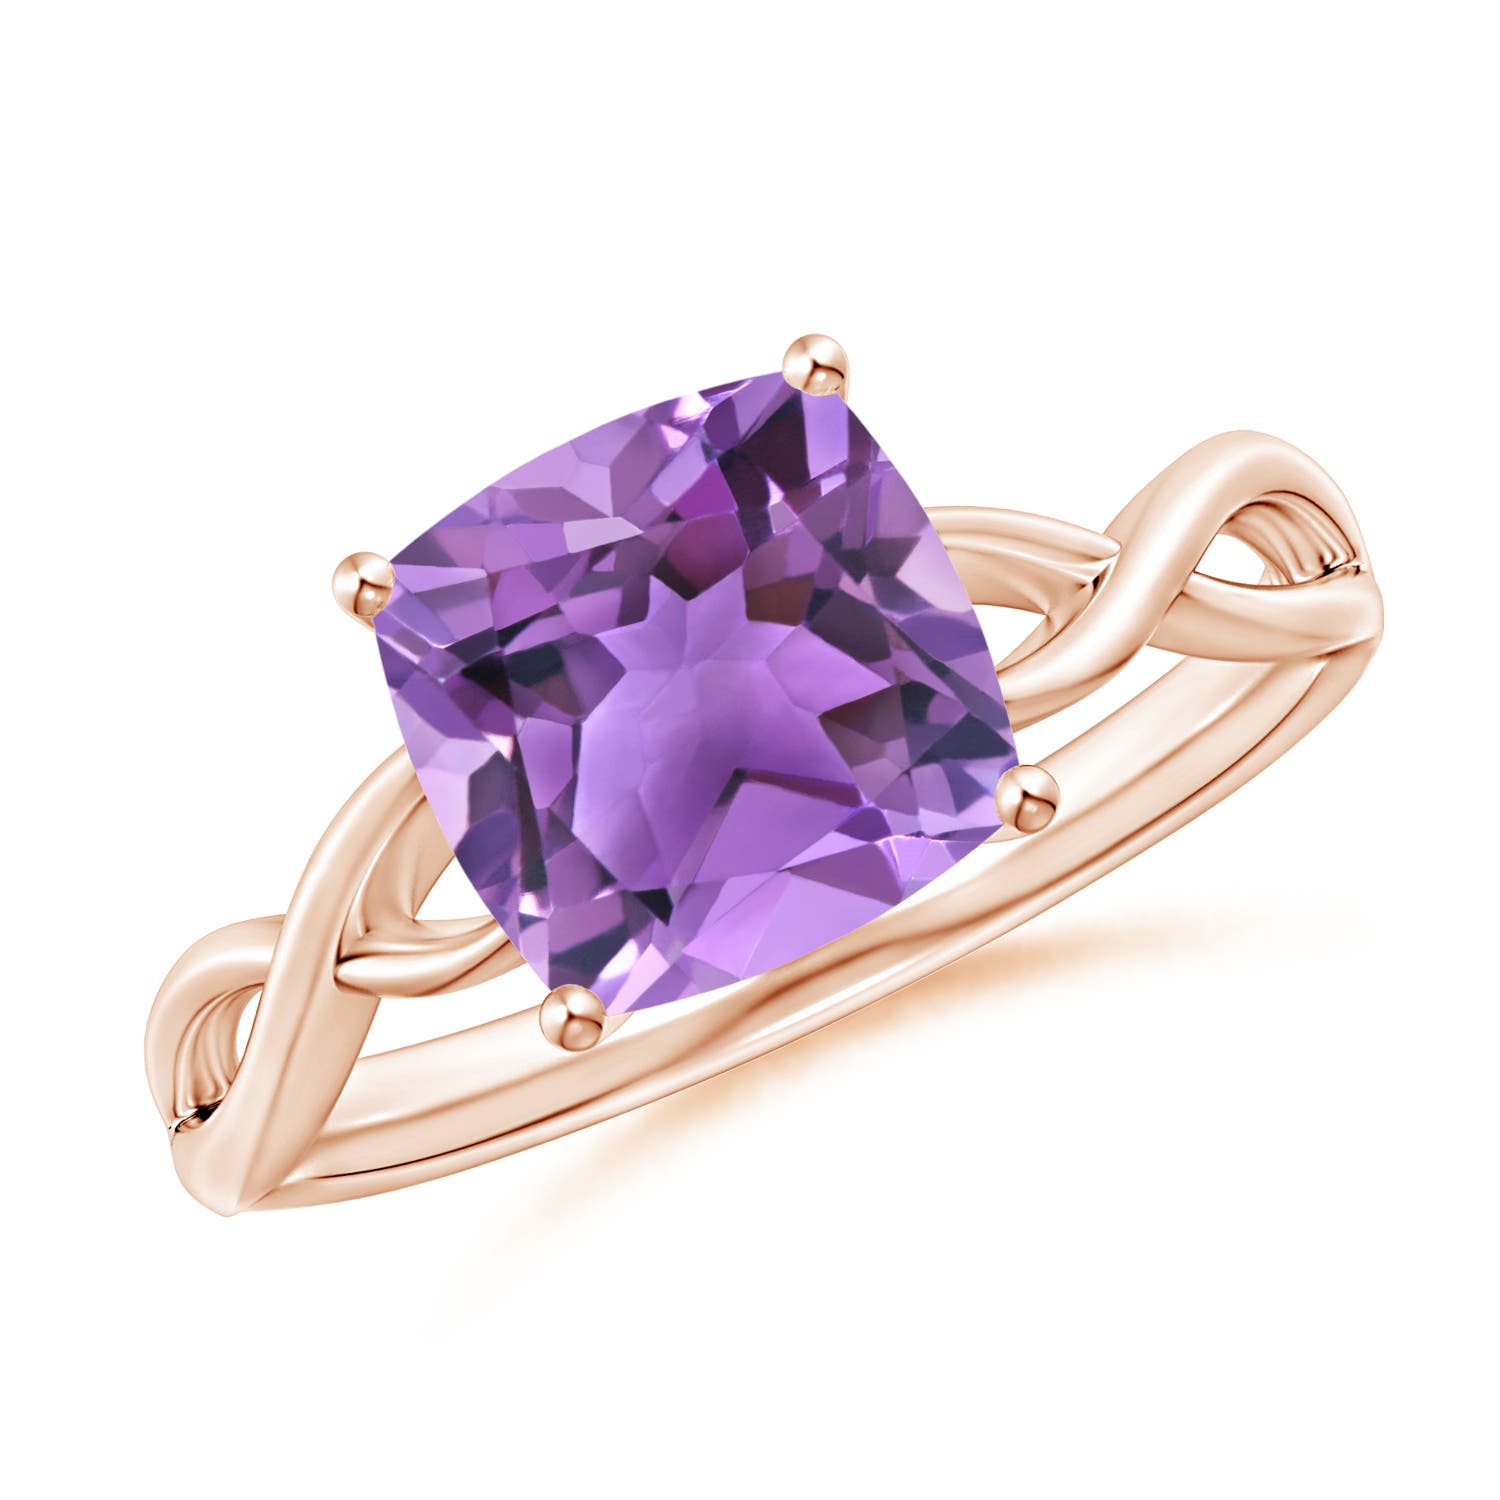 AA - Amethyst / 2.2 CT / 14 KT Rose Gold